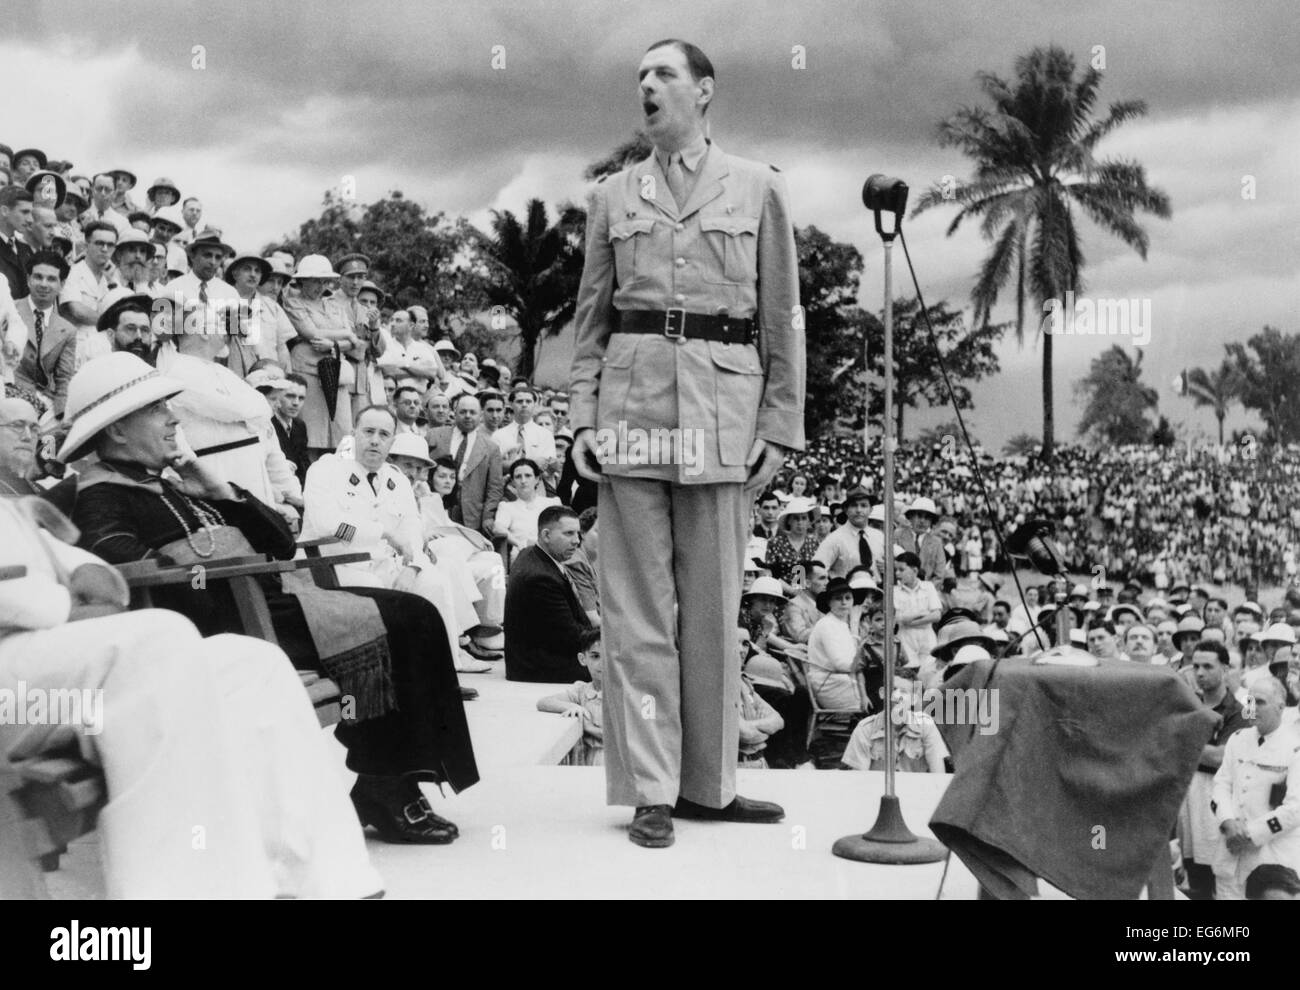 General Charles de Gaulle speaking at the African-French Conference in Brazzaville, Congo, 1944. Brazzaville Conference began Stock Photo